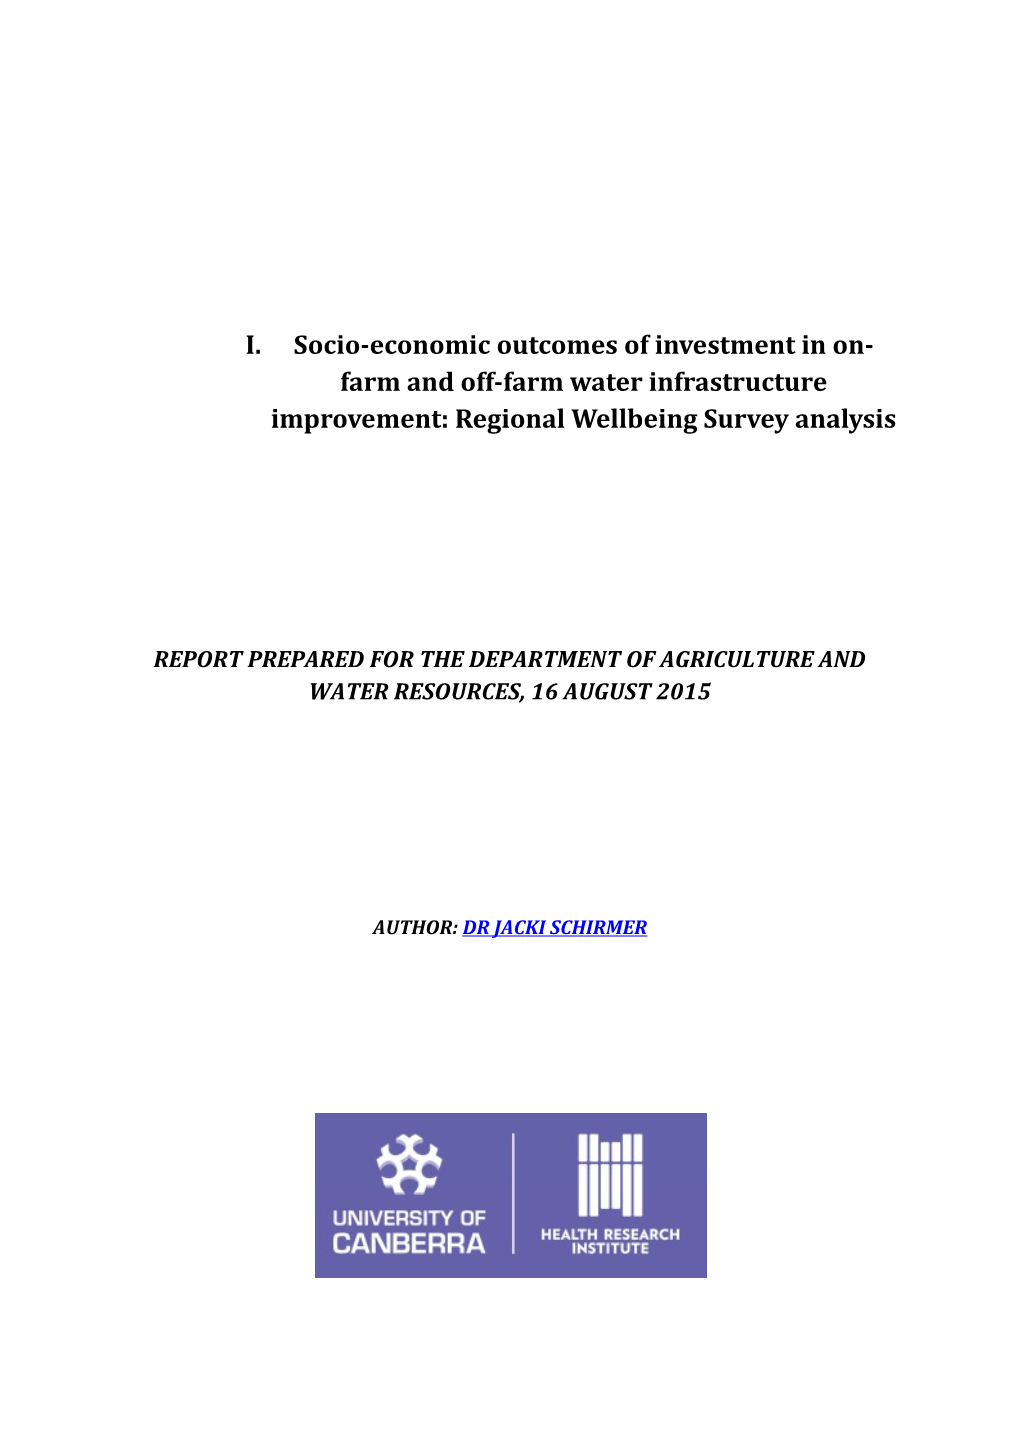 Socio-Economic Outcomes of Investment in On-Farm and Off-Farm Water Infrastructure Improvement